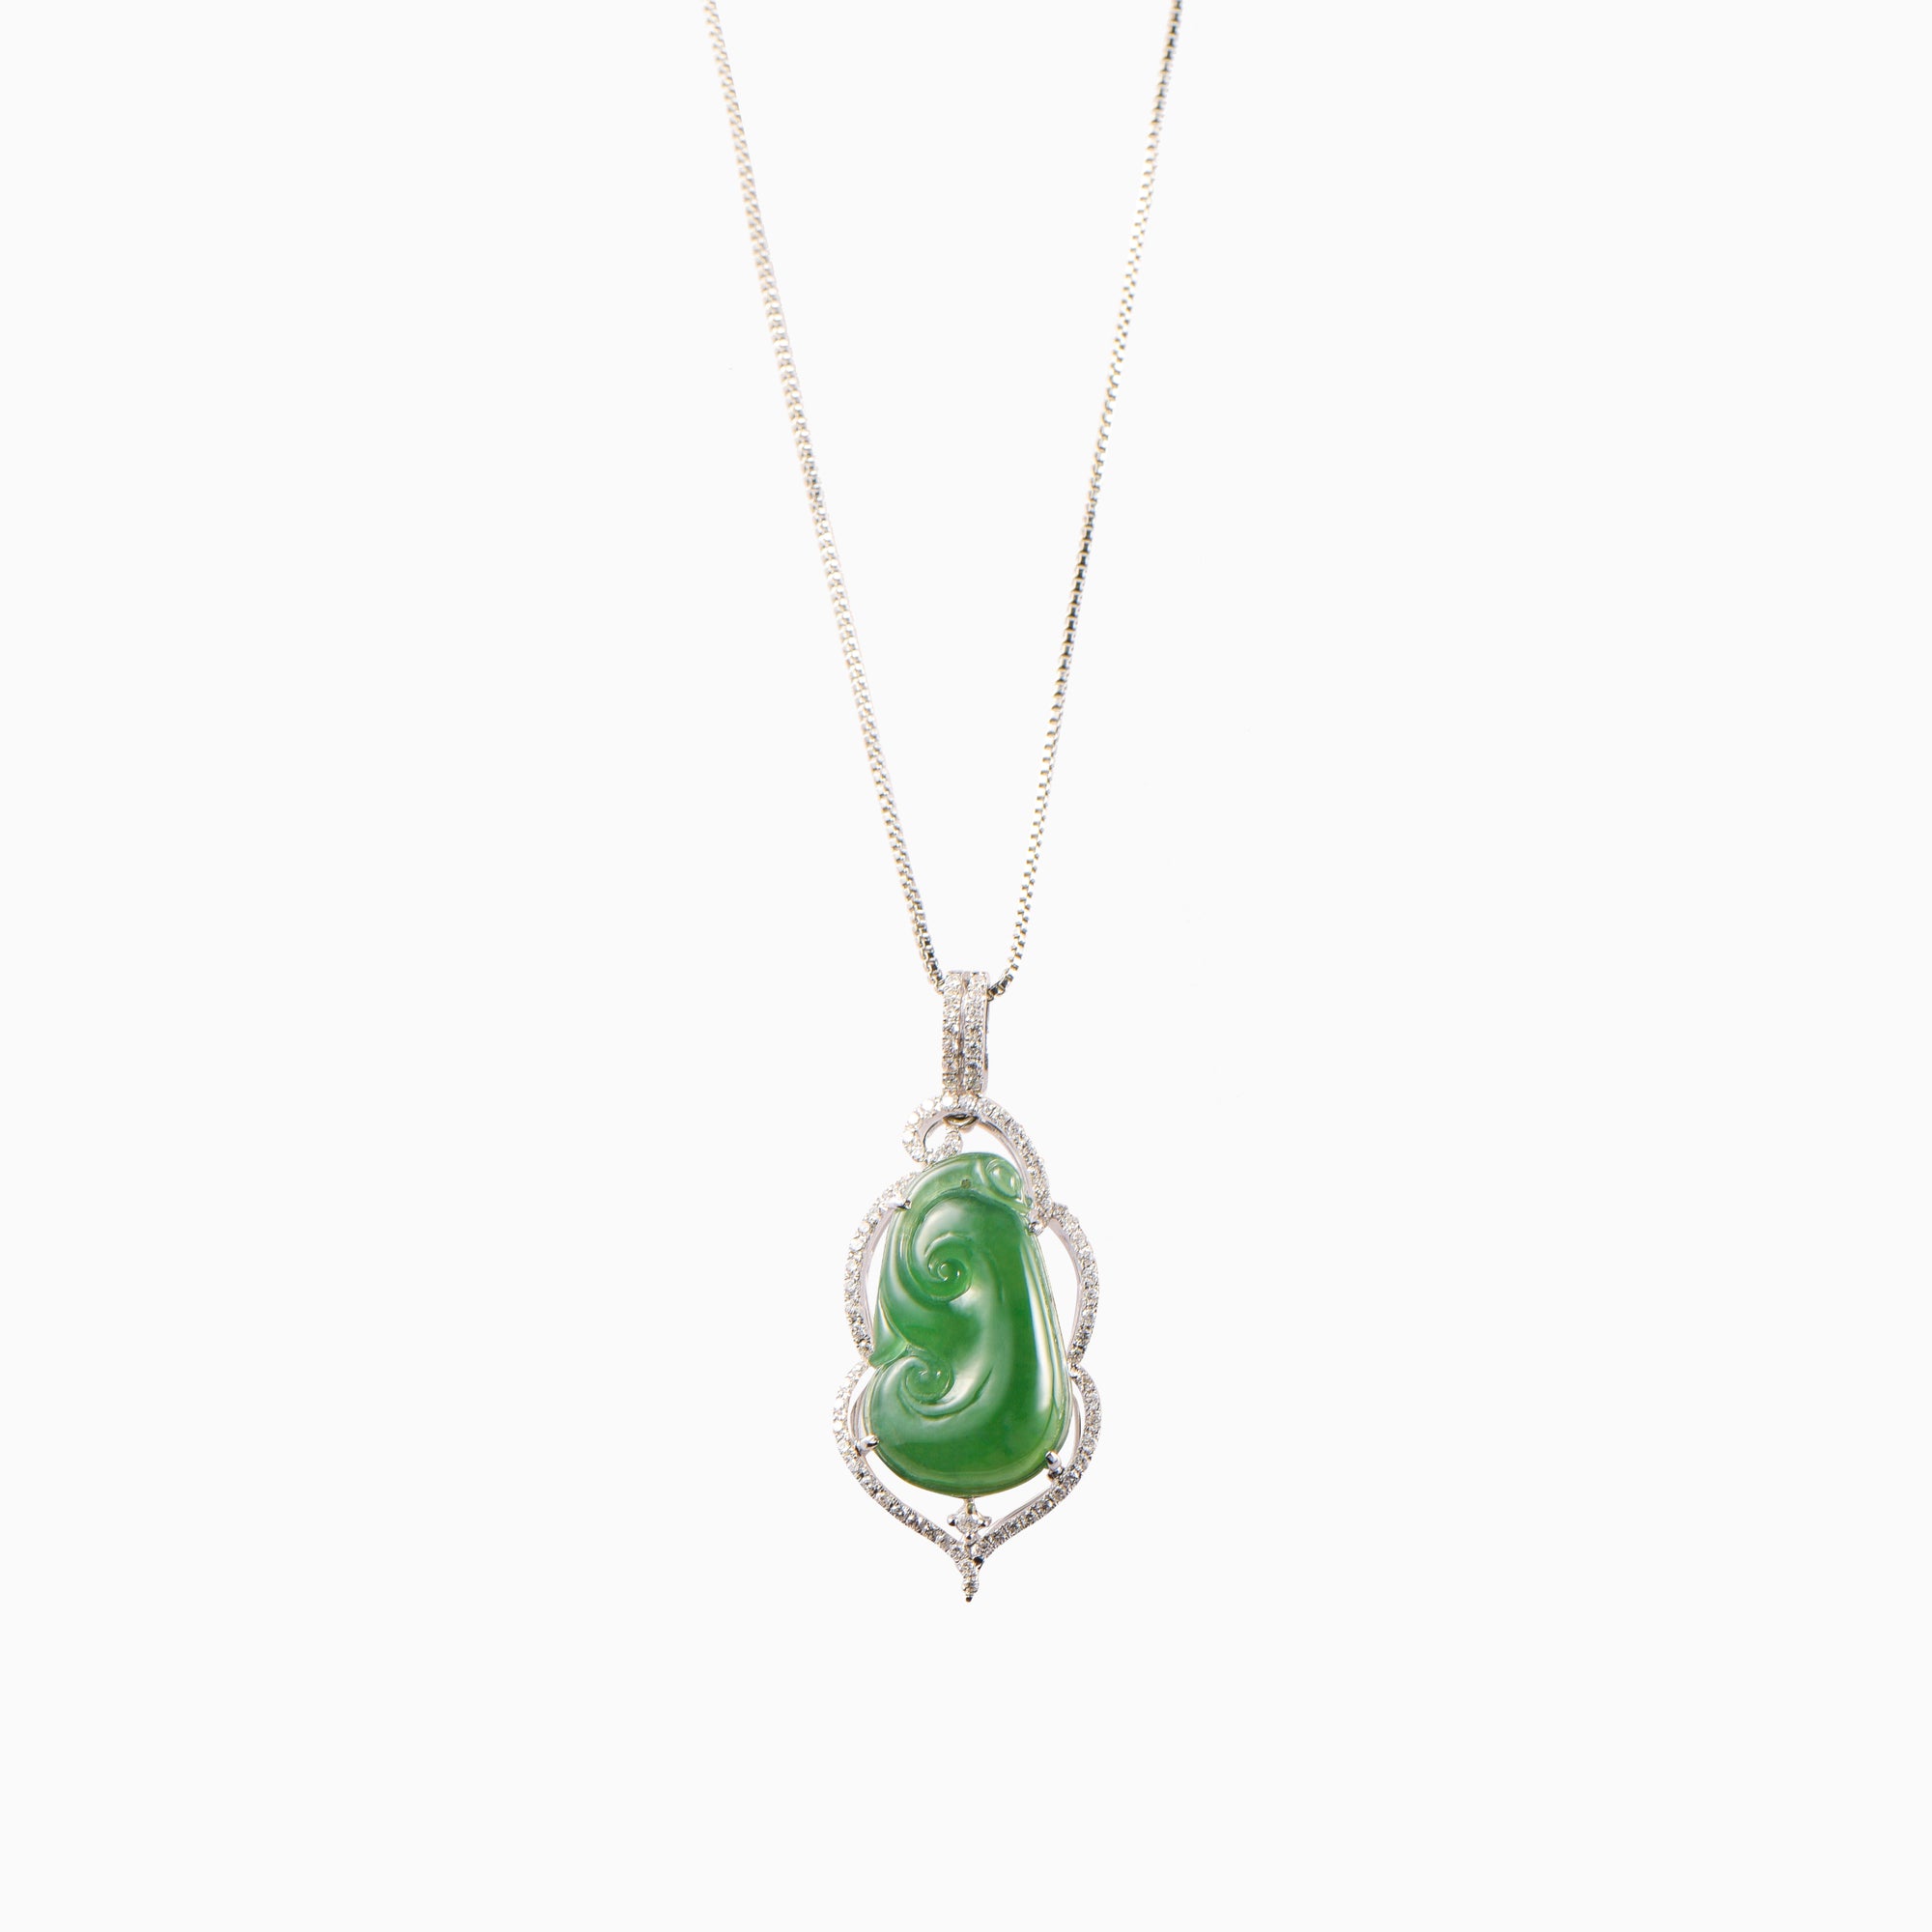 Imperial jade pendant shaped in a Ruyi surrounded by a ring of small diamonds and set on a diamond clasp